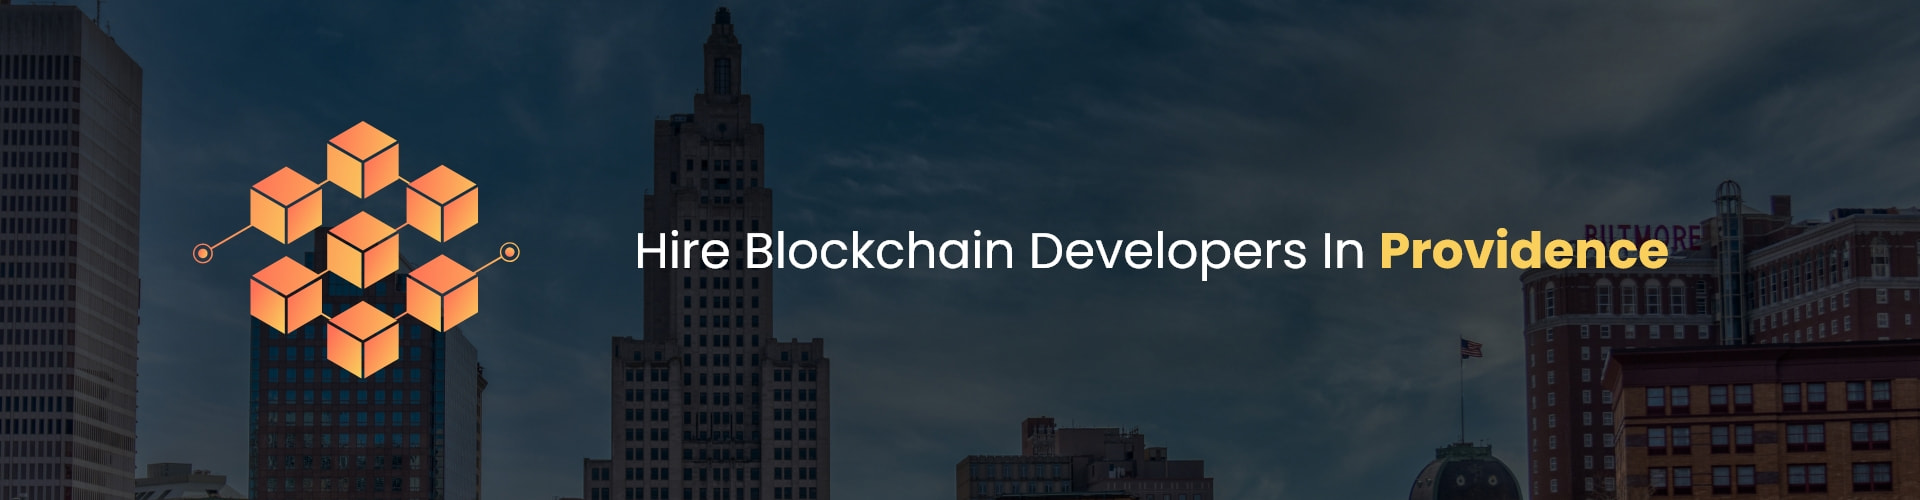 hire blockchain developers in providence